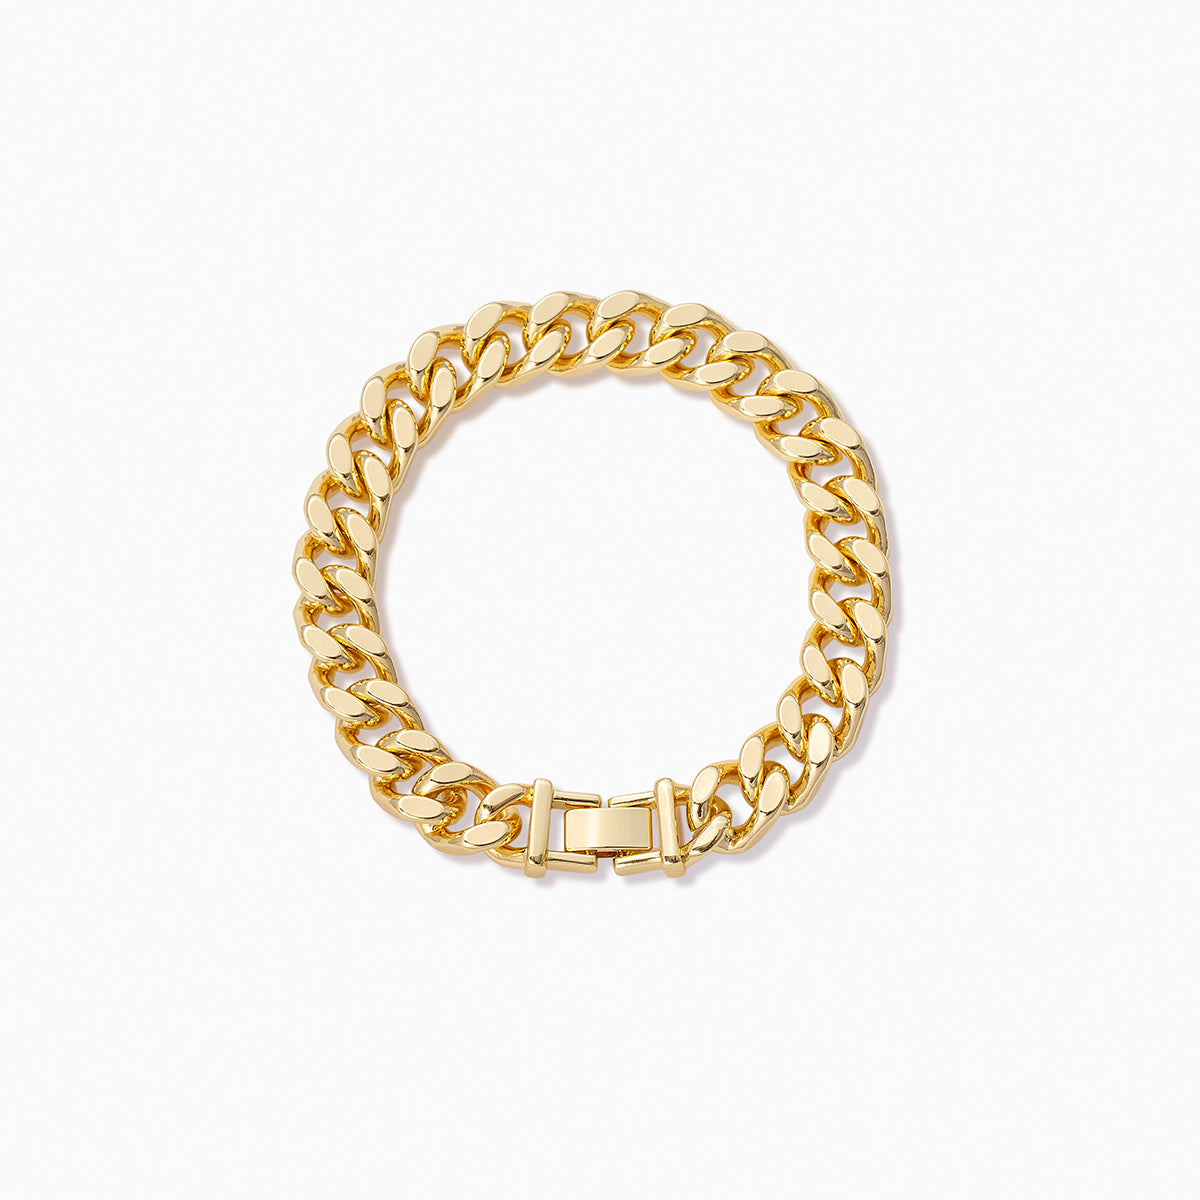 First Impression Chain Bracelet | Gold | Product Image | Uncommon James